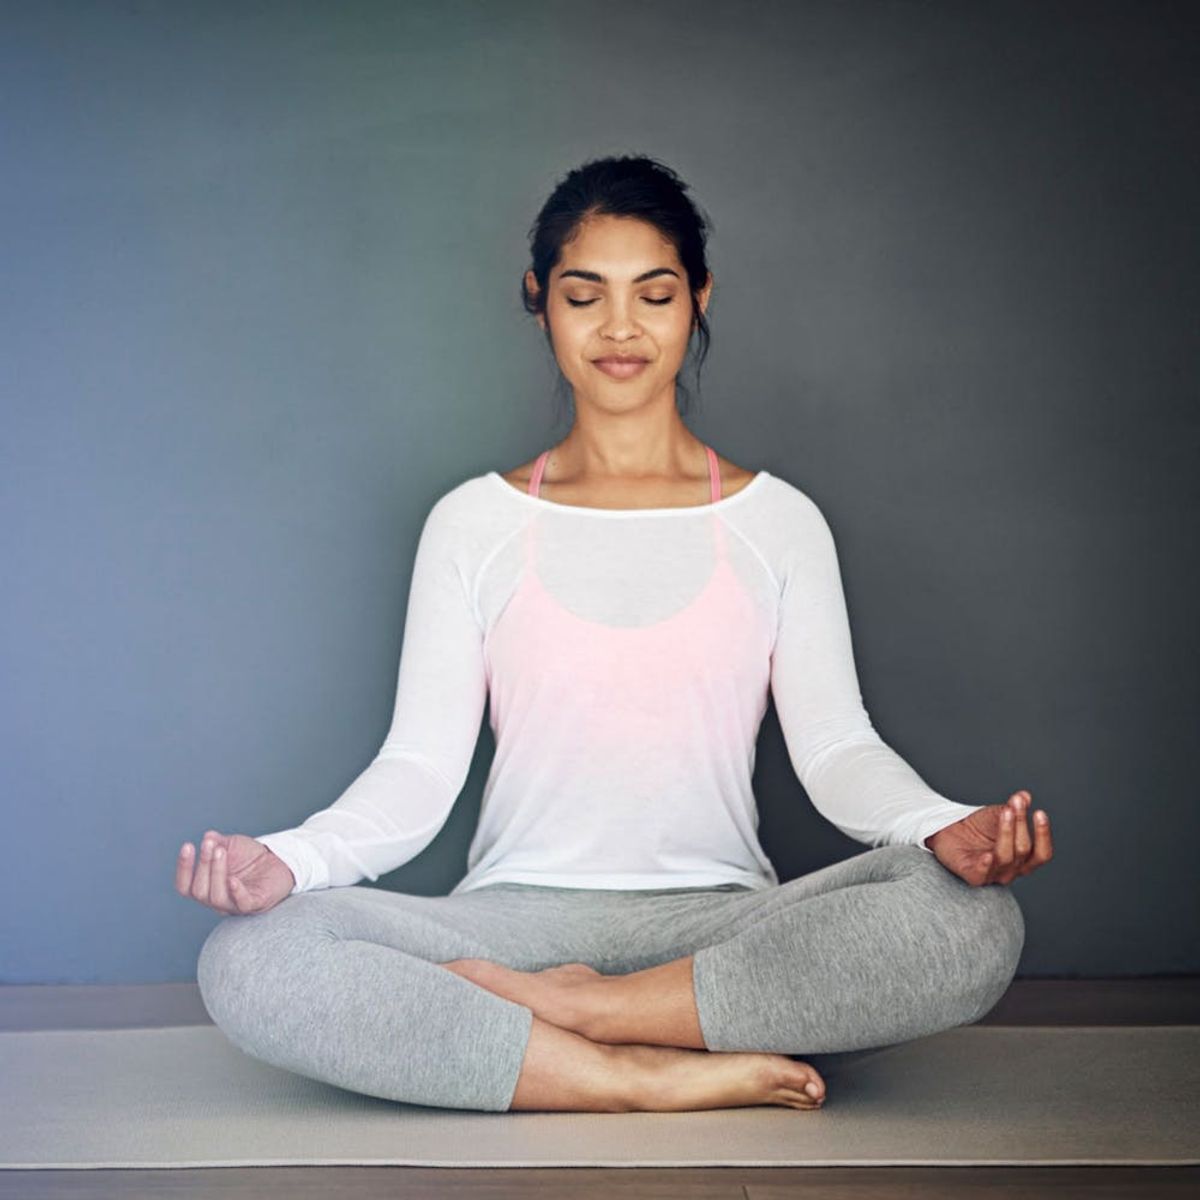 What I Learned from Going to a Meditation Studio